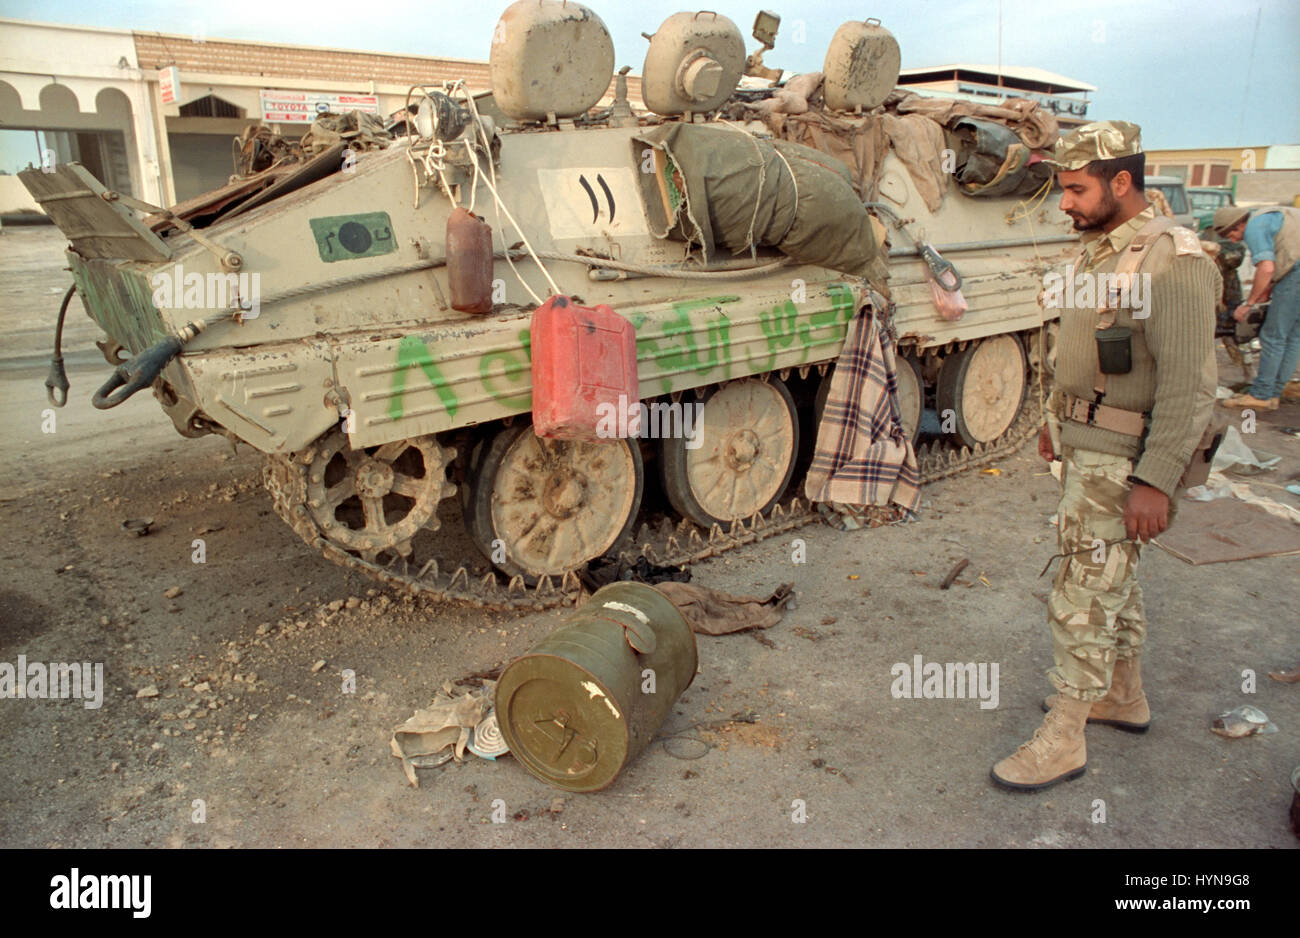 A Qatari soldier inspects an Iraqi armored personnel carrier destroyed by U.S Aircraft following the Battle of Khafji February 2, 1991 in Khafji City, Saudi Arabia. The Battle of Khafji was the first major ground engagement of the Gulf War. Stock Photo